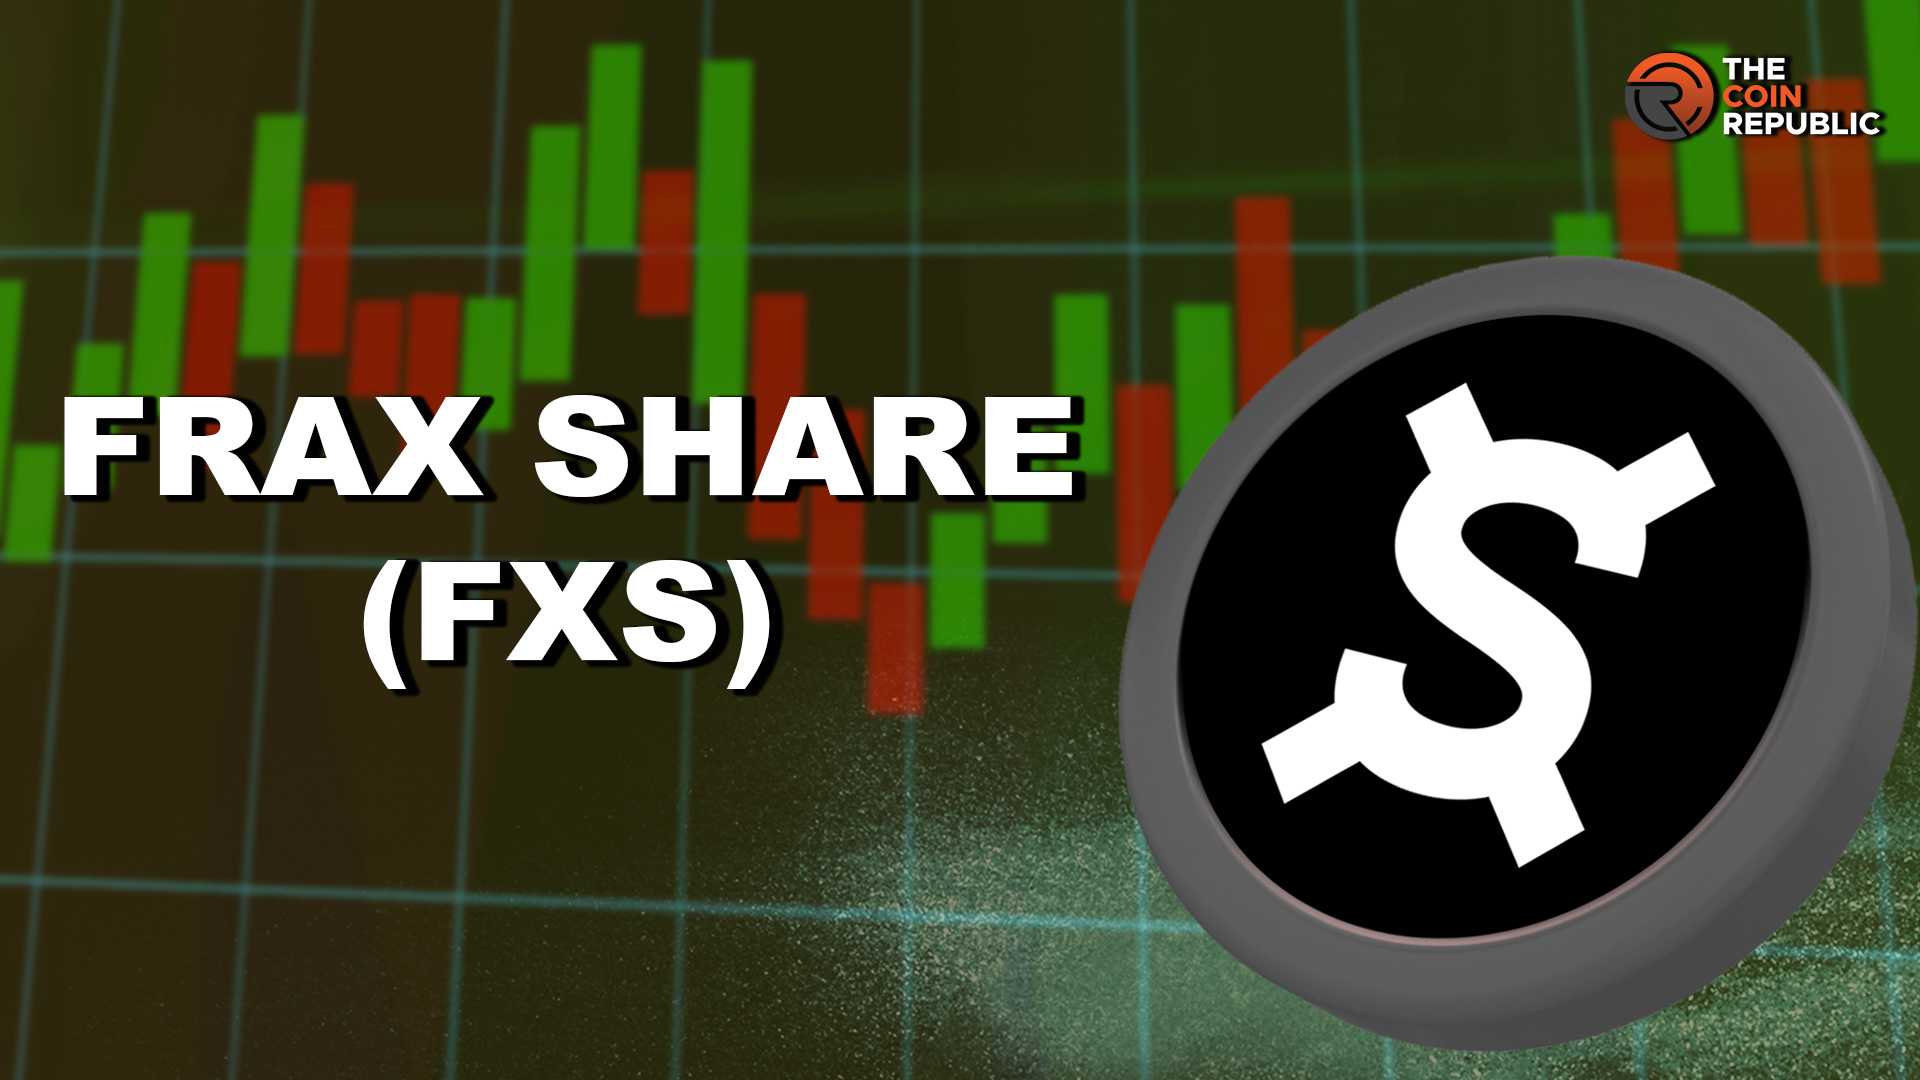 Frax Share Price Prediction: FXS Crypto to Reach New Highs Soon?